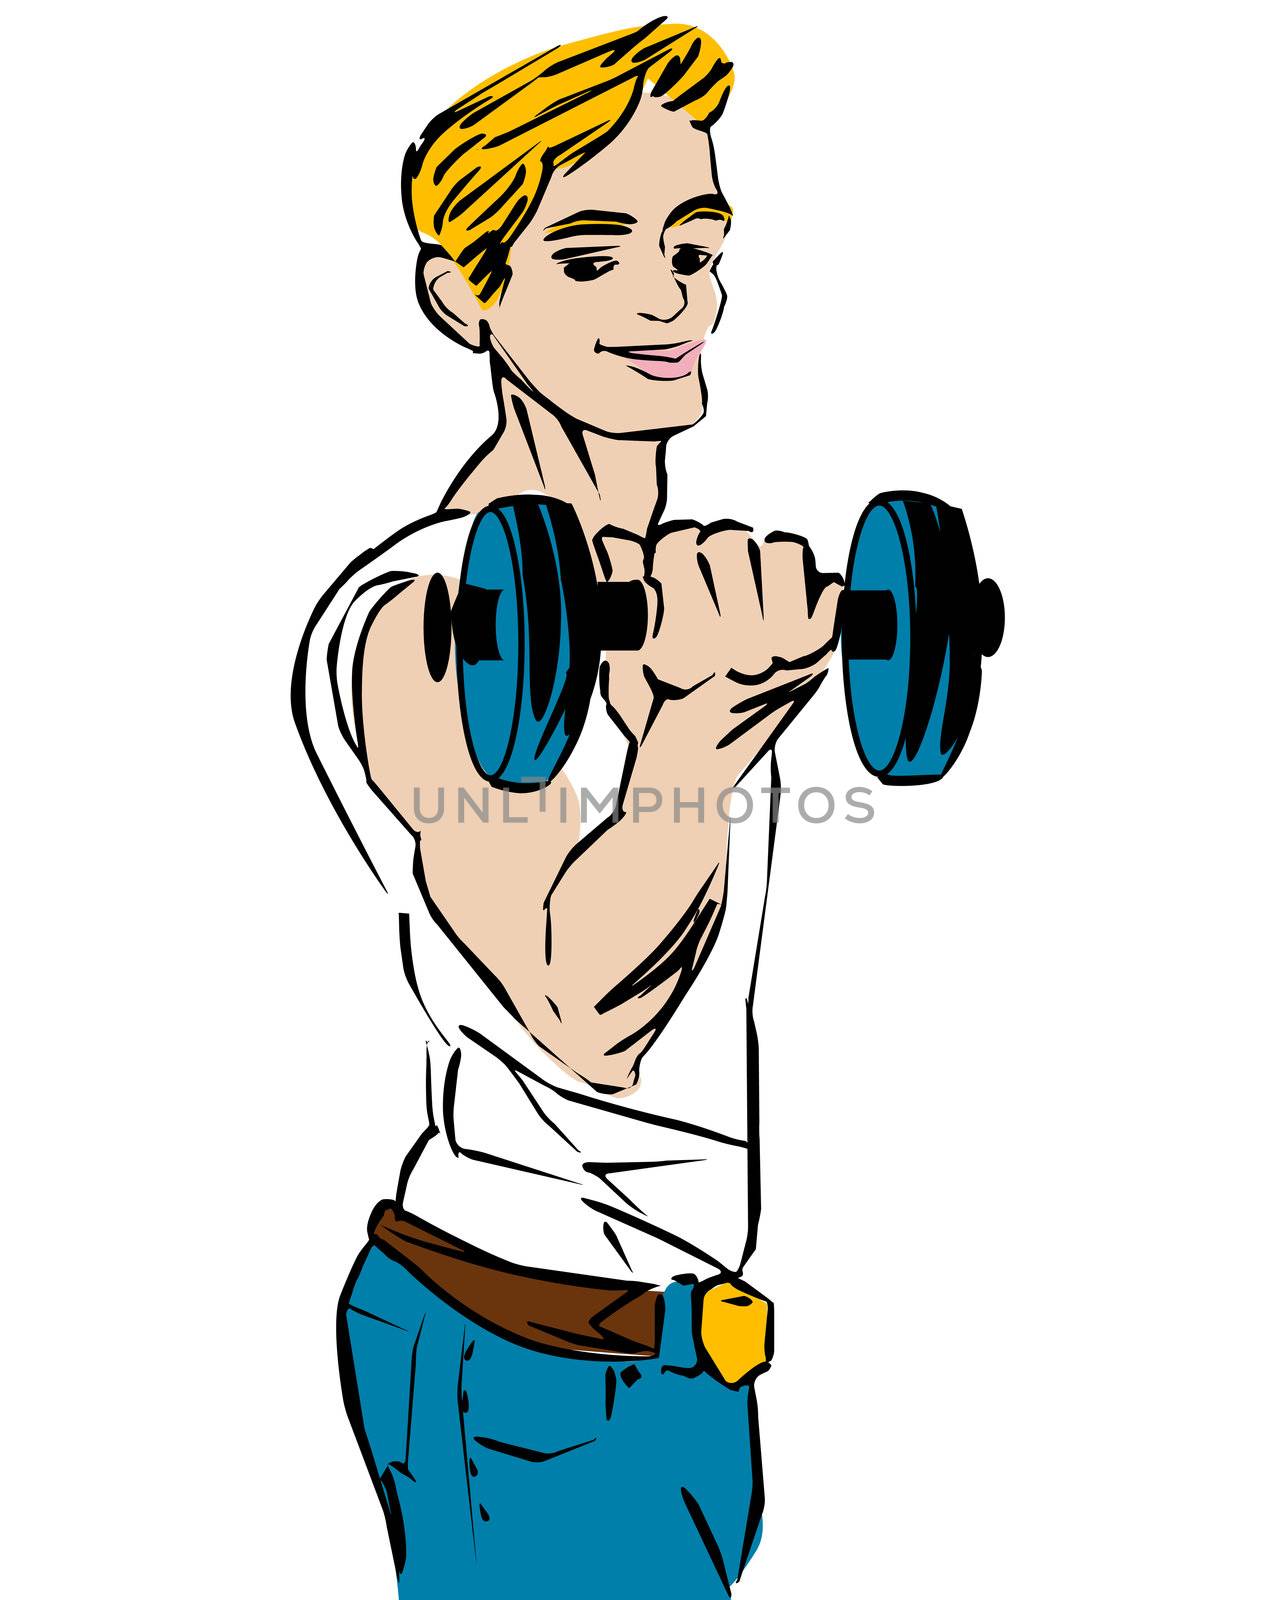 Fitness boy by catacos